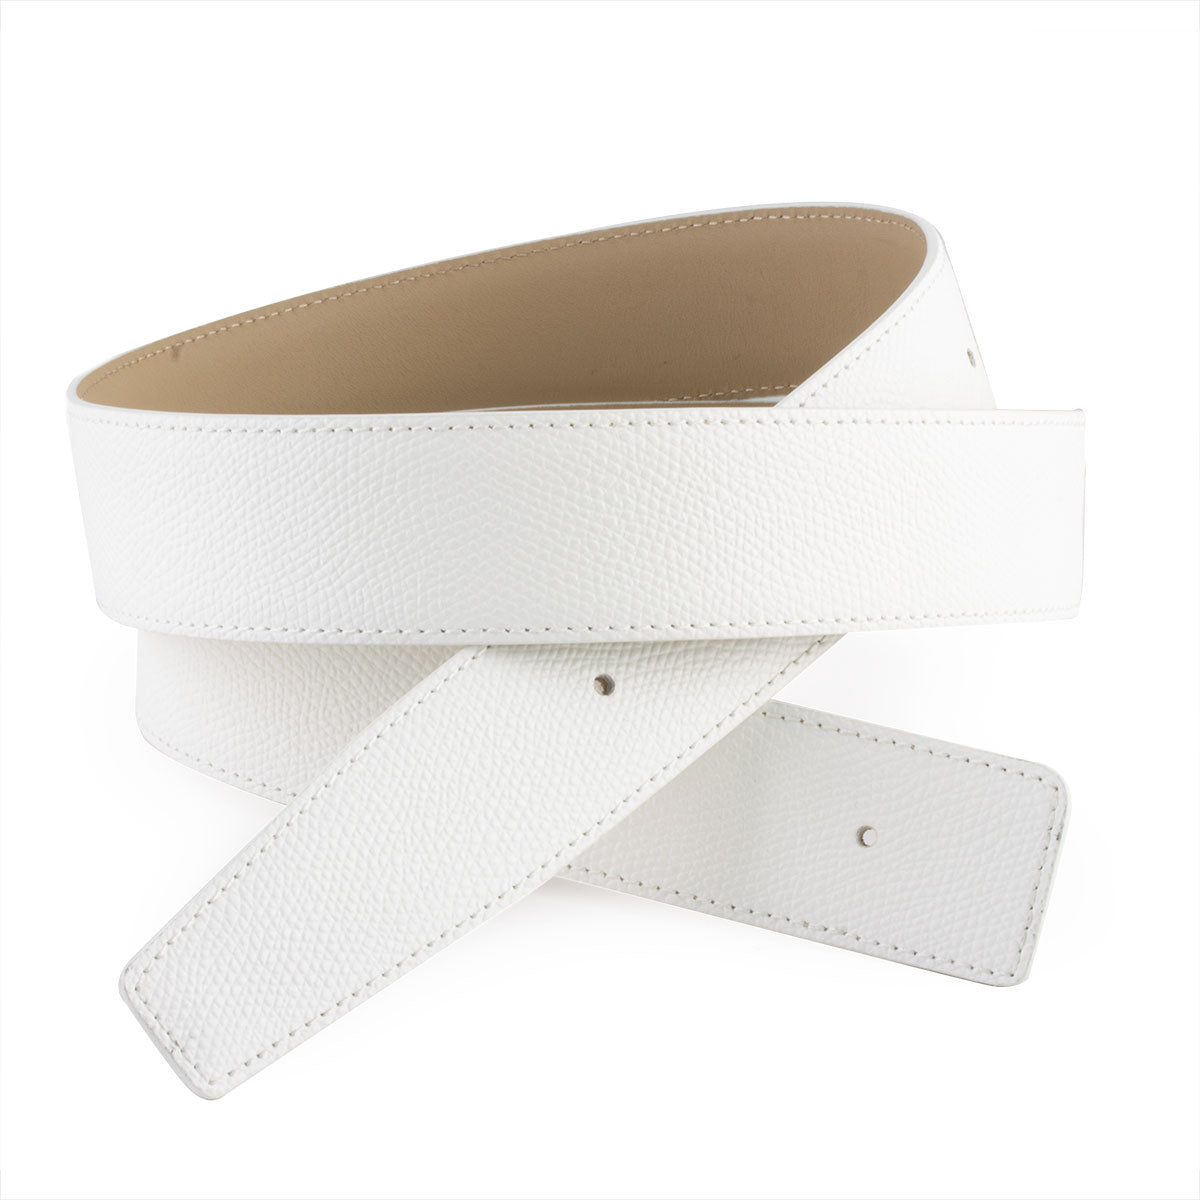 Hermès style leather belt - Grained calf